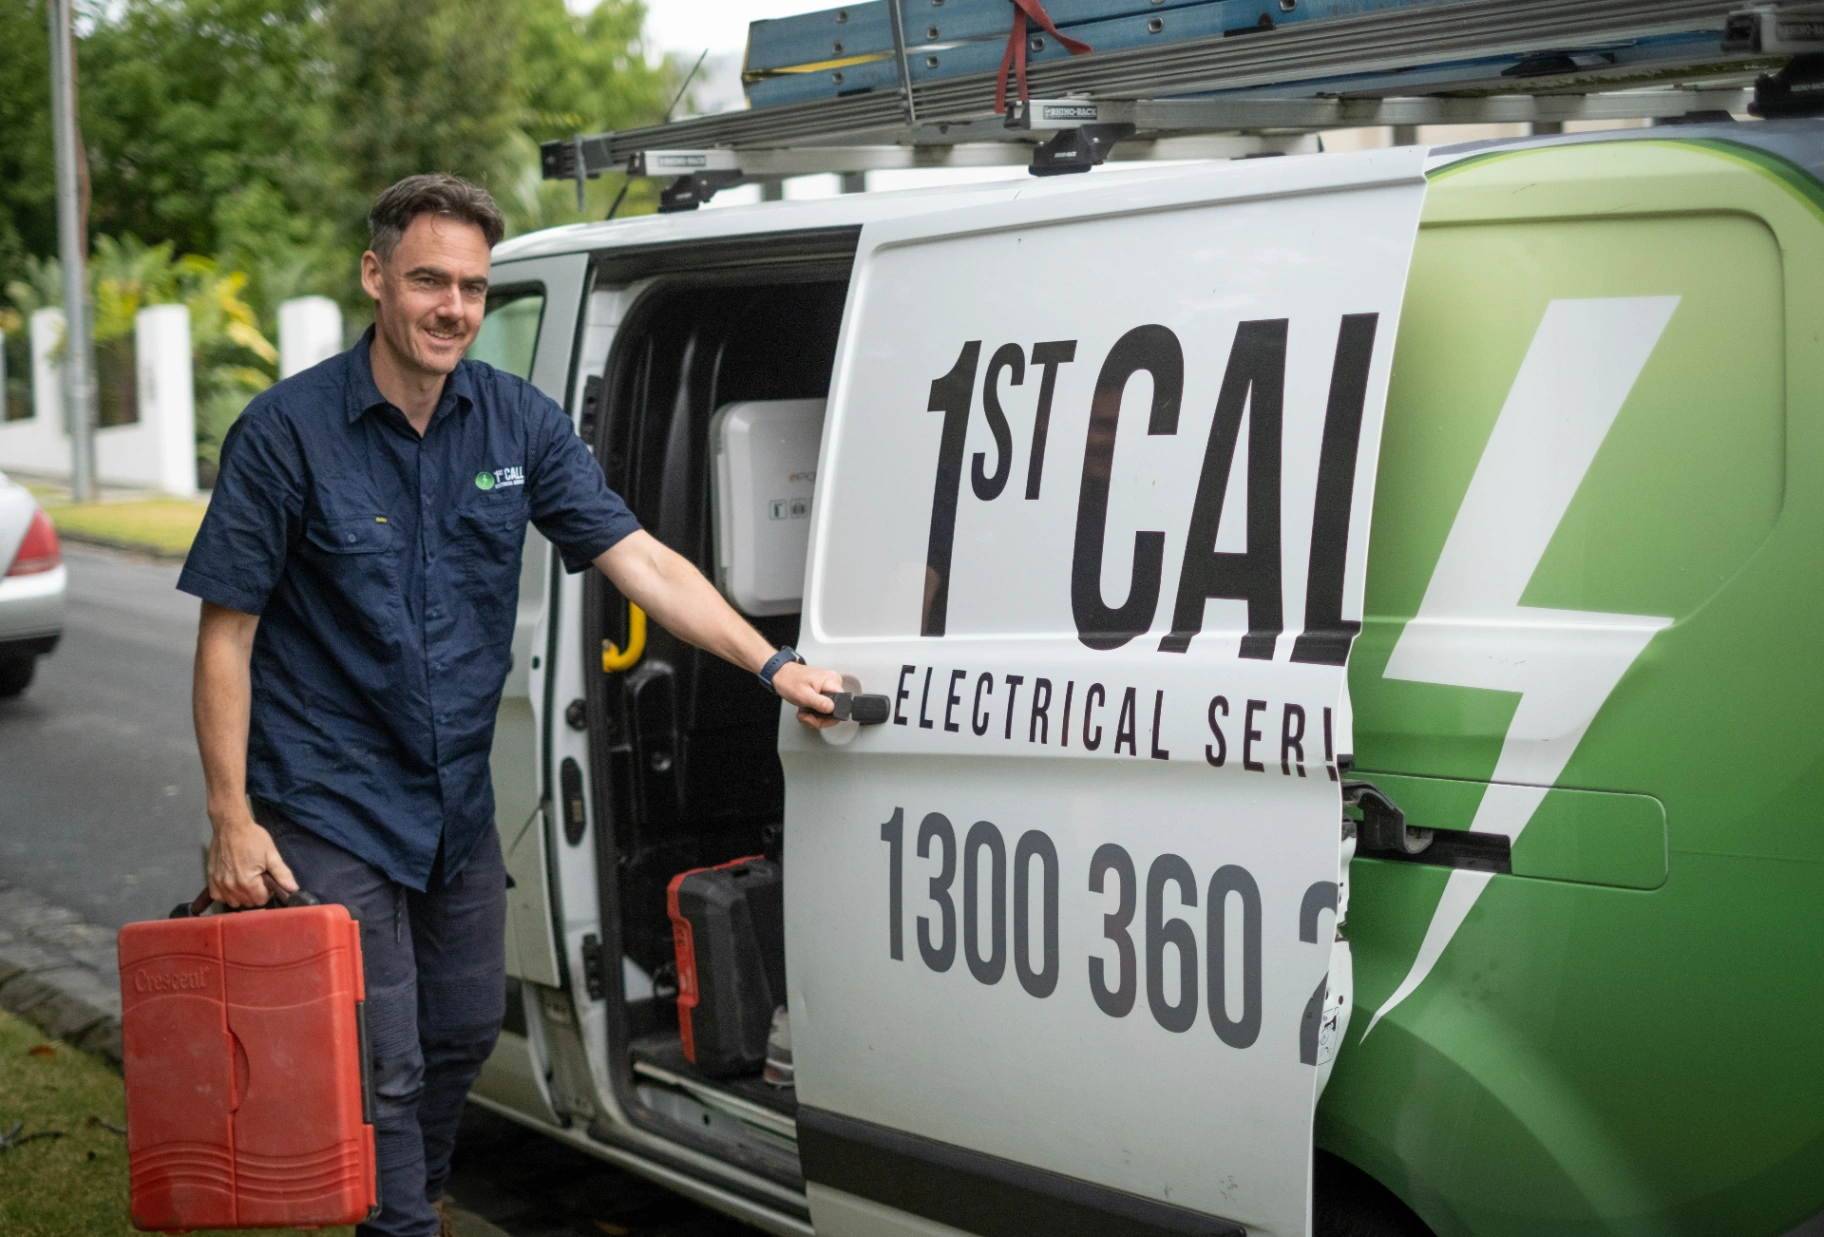 1st Call Electrical